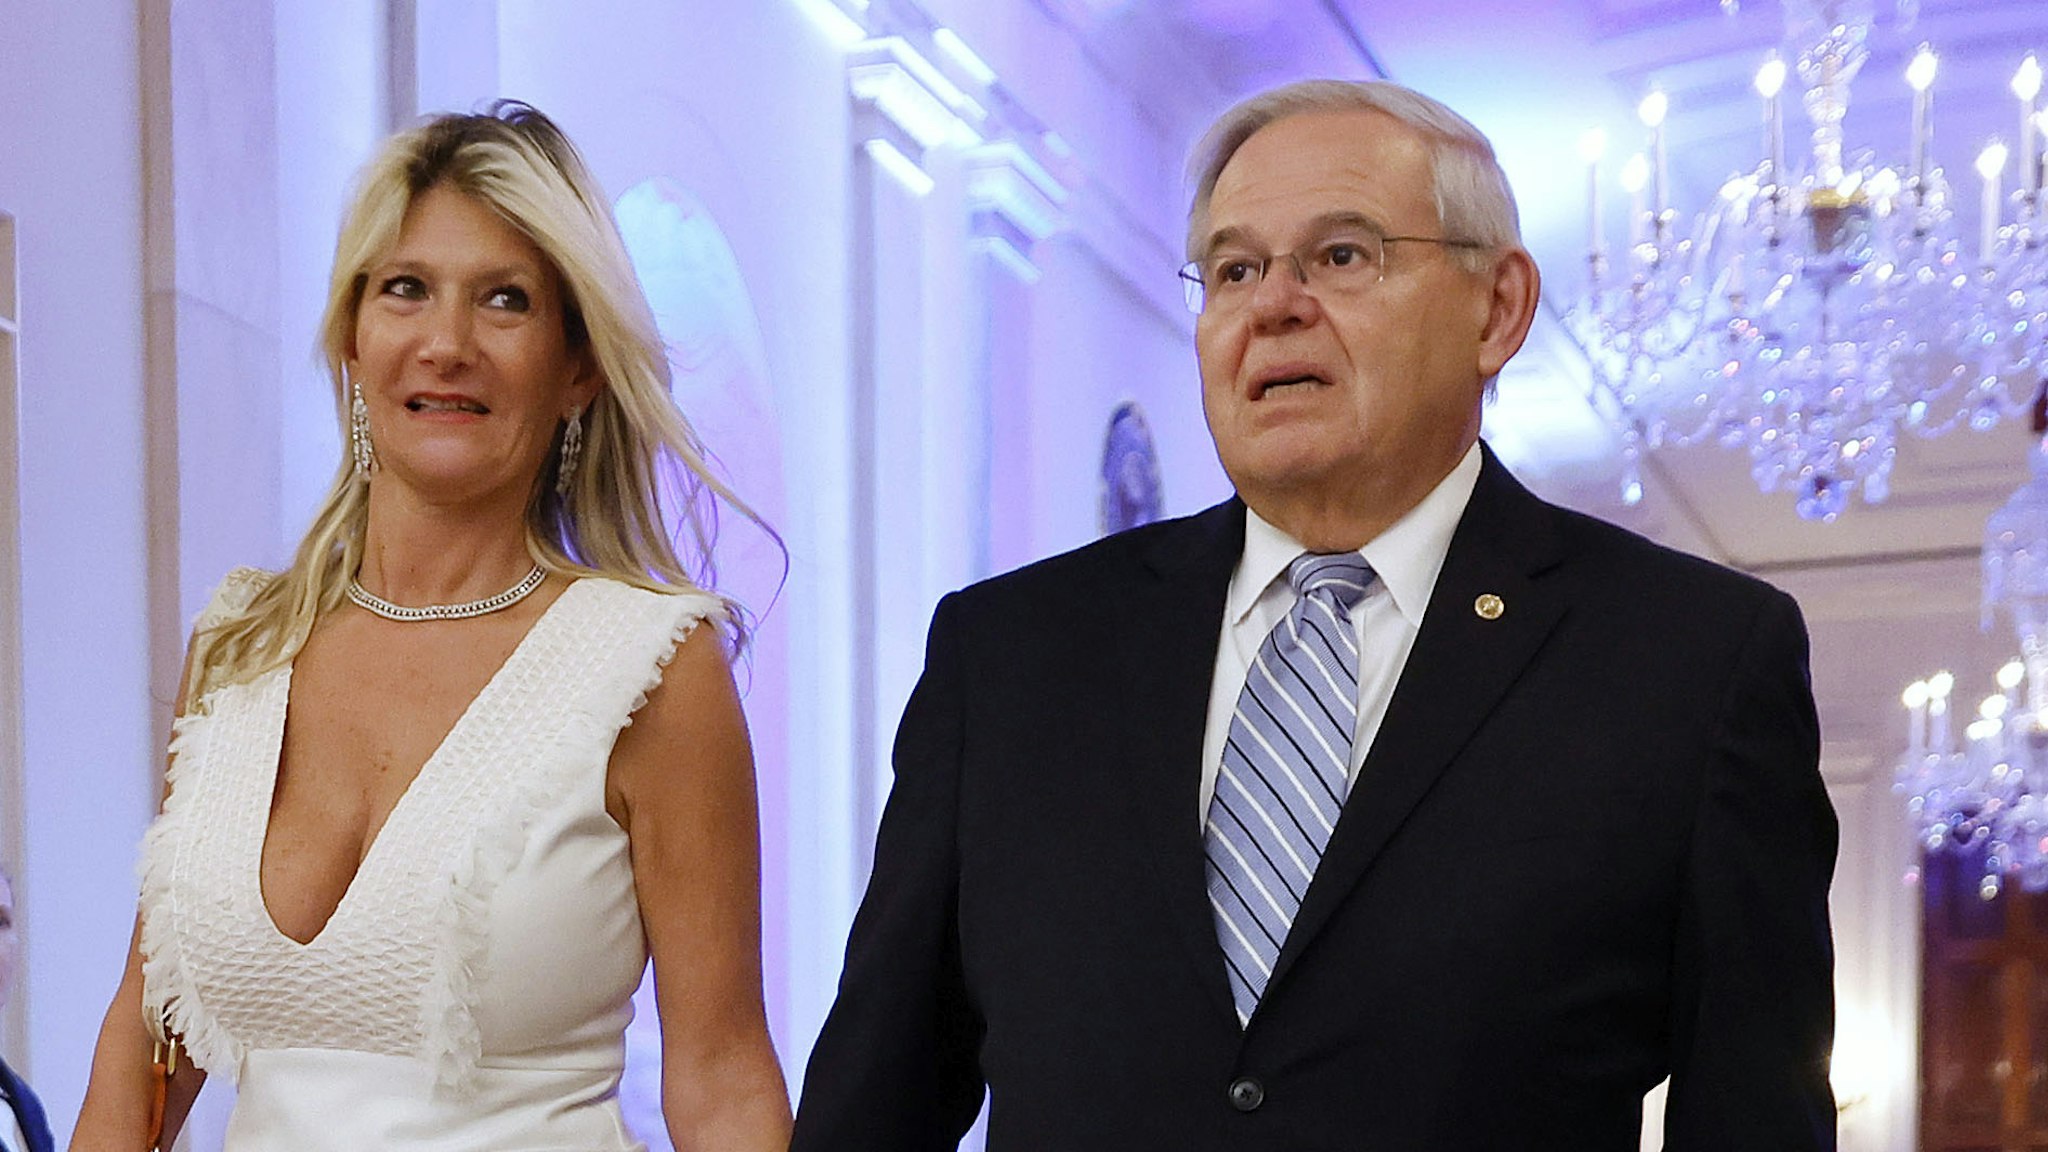 WASHINGTON, DC - MAY 16: U.S. Senate Foreign Relations Committee Chairman Bob Menendez (D-NJ) and his wife Nadine Arslanian arrive for a reception honoring of Greek Prime Minister Kyriakos Mitsotakis and his wife Mareva Mitsotakis in the East Room of the White House on May 16, 2022 in Washington, DC. President Joe Biden hosted Mitsotakis for bilateral meetings earlier in the day where they discussed allied efforts to "support the people of Ukraine and impose economic costs on Russia for its unprovoked aggression," according to the White House.